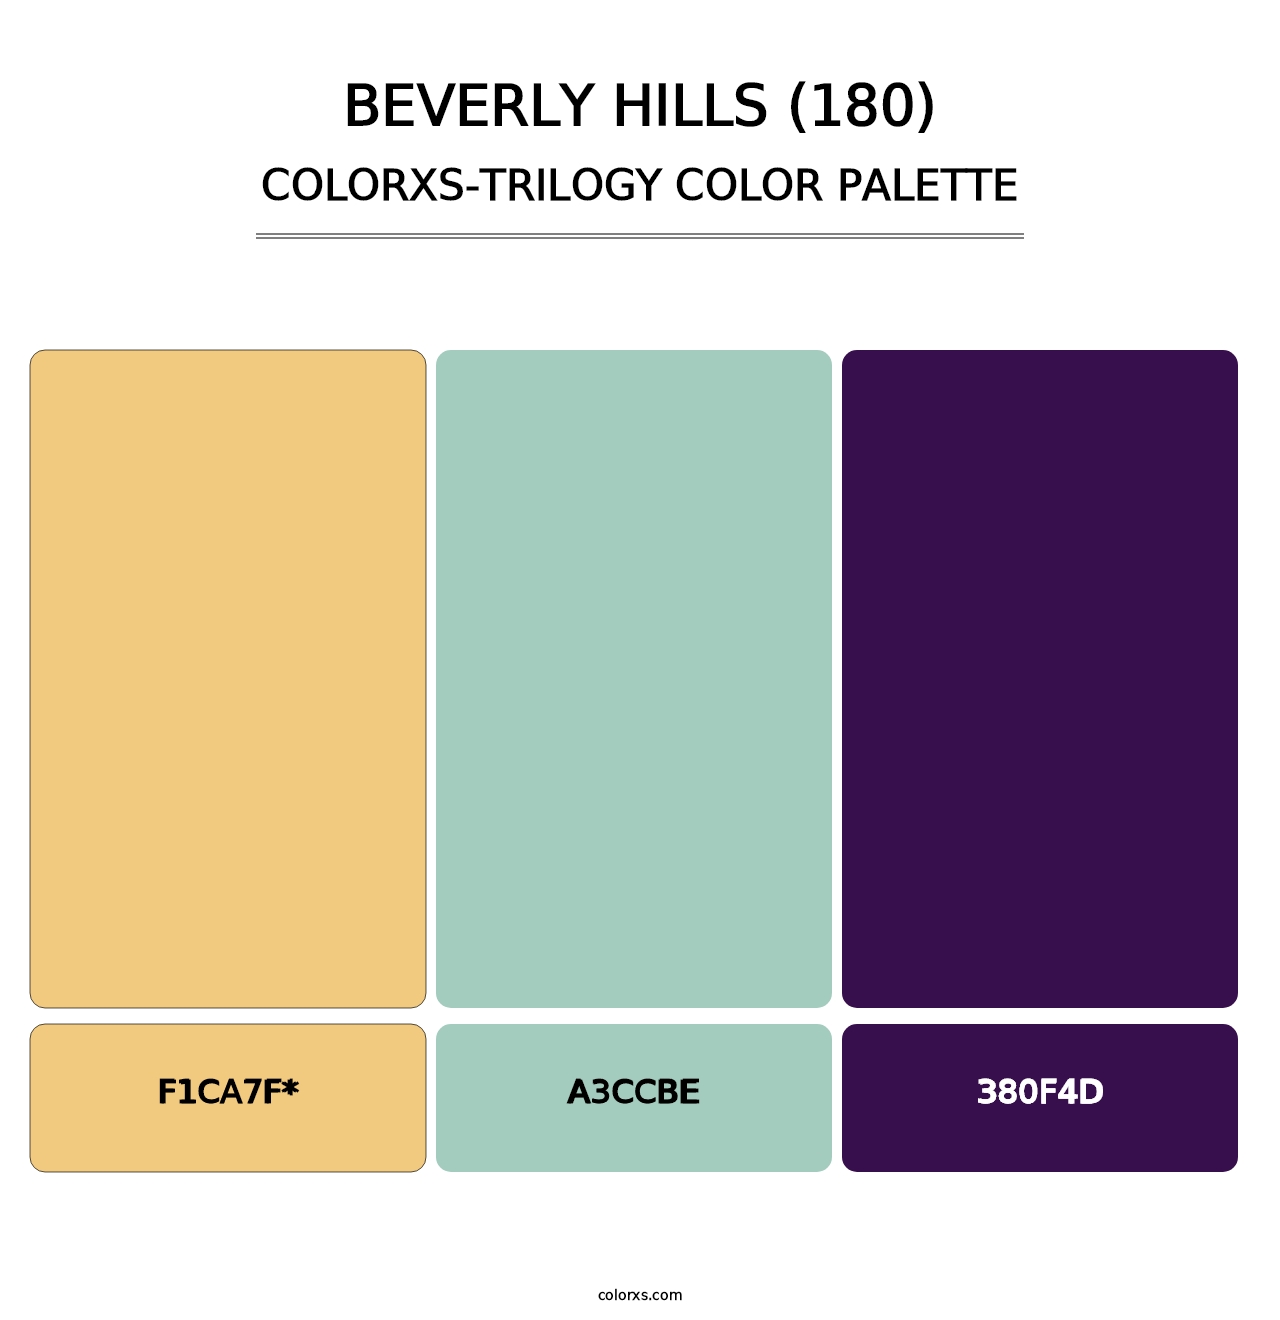 Beverly Hills (180) - Colorxs Trilogy Palette